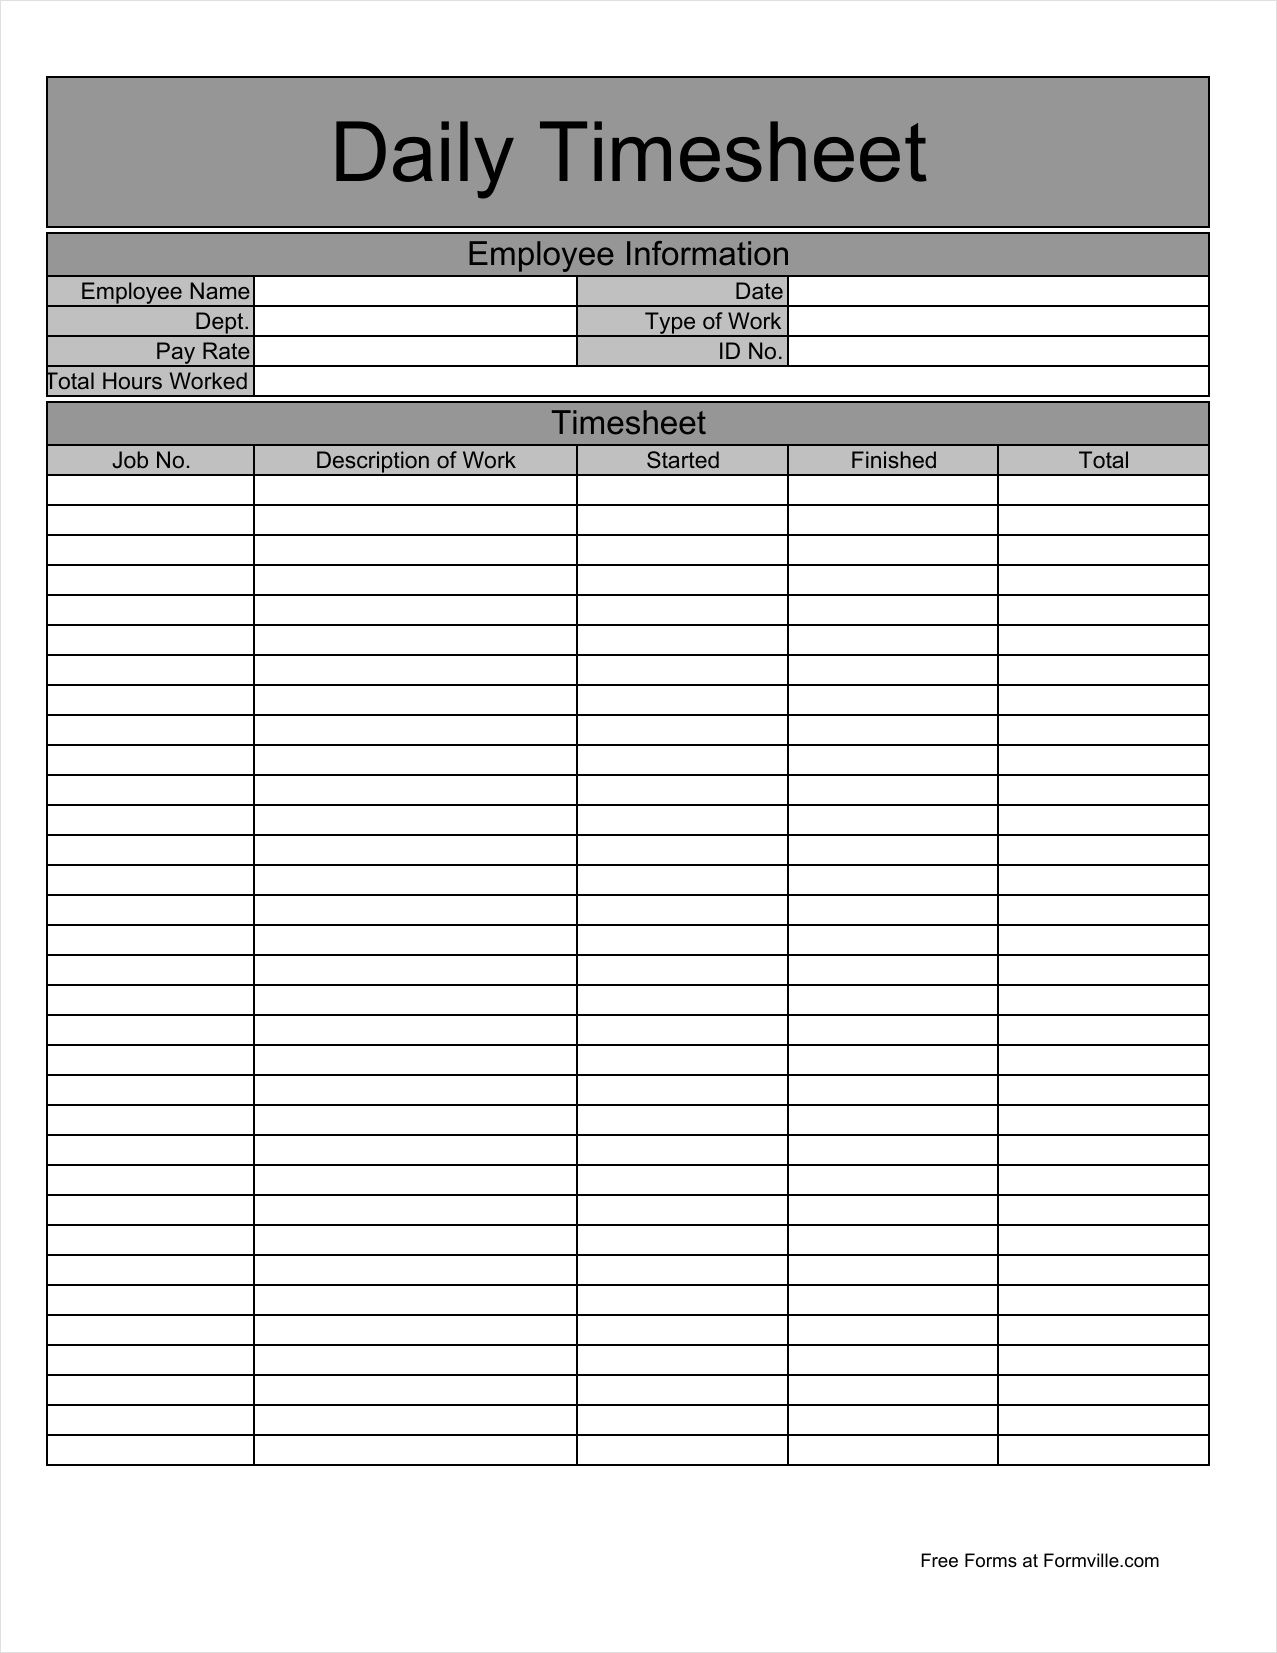 example of daily timesheet template